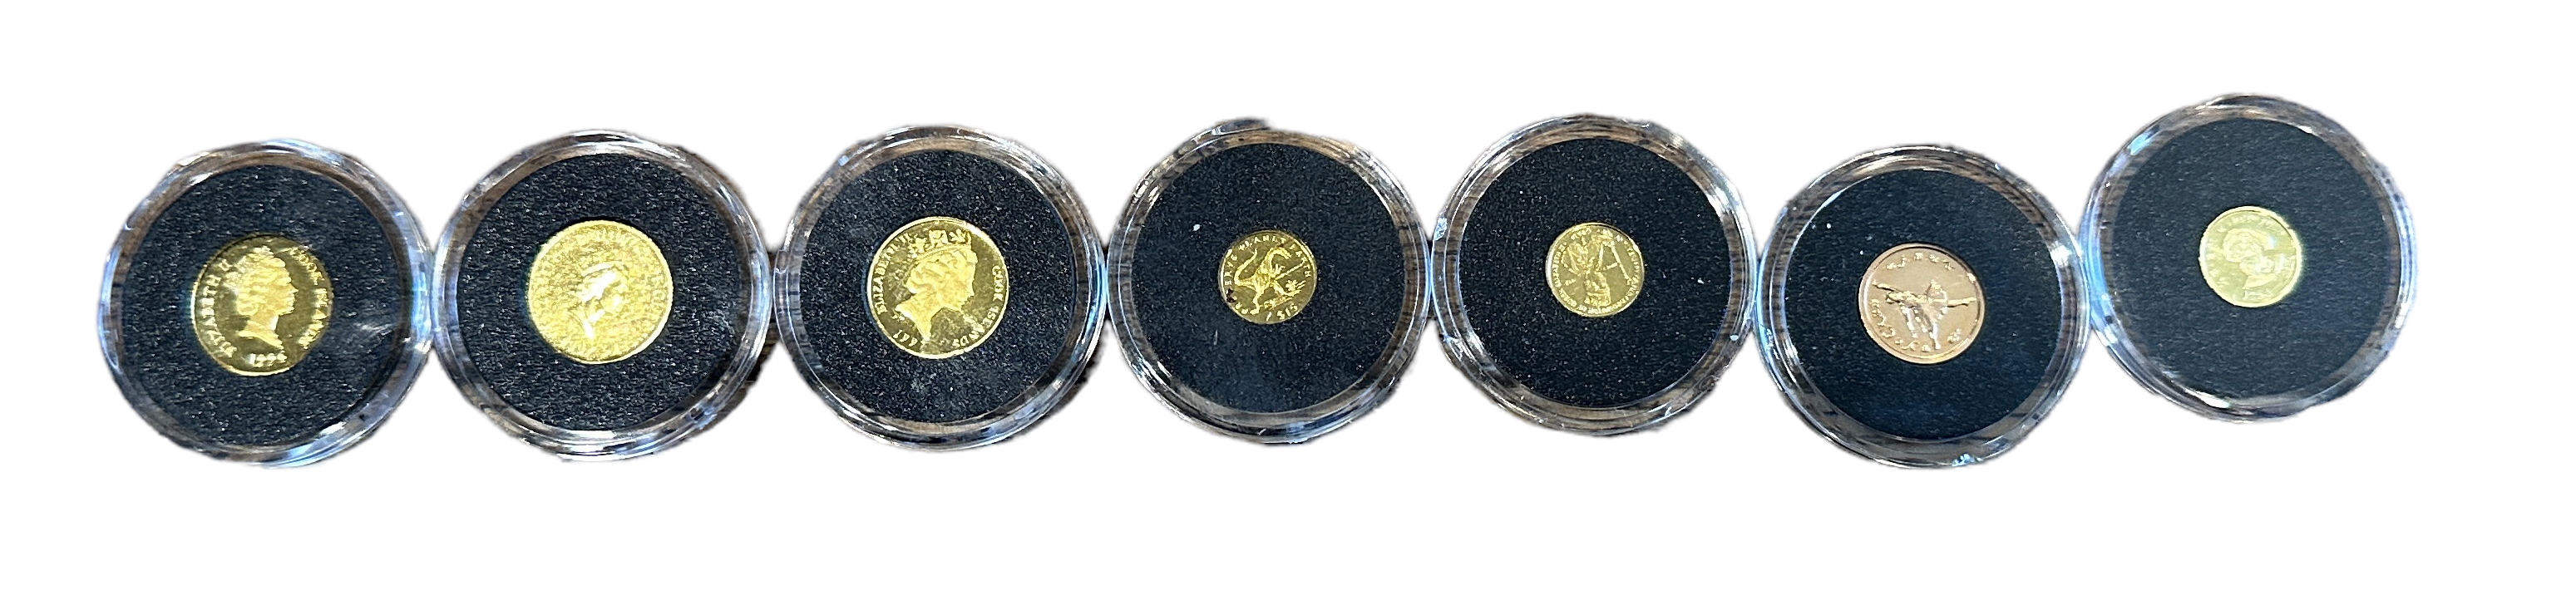 Lot of 7 Miniature Gold Coins to include - Yellowstone 10 dollars-Guernsey £5-Cook Islands. - Image 9 of 9